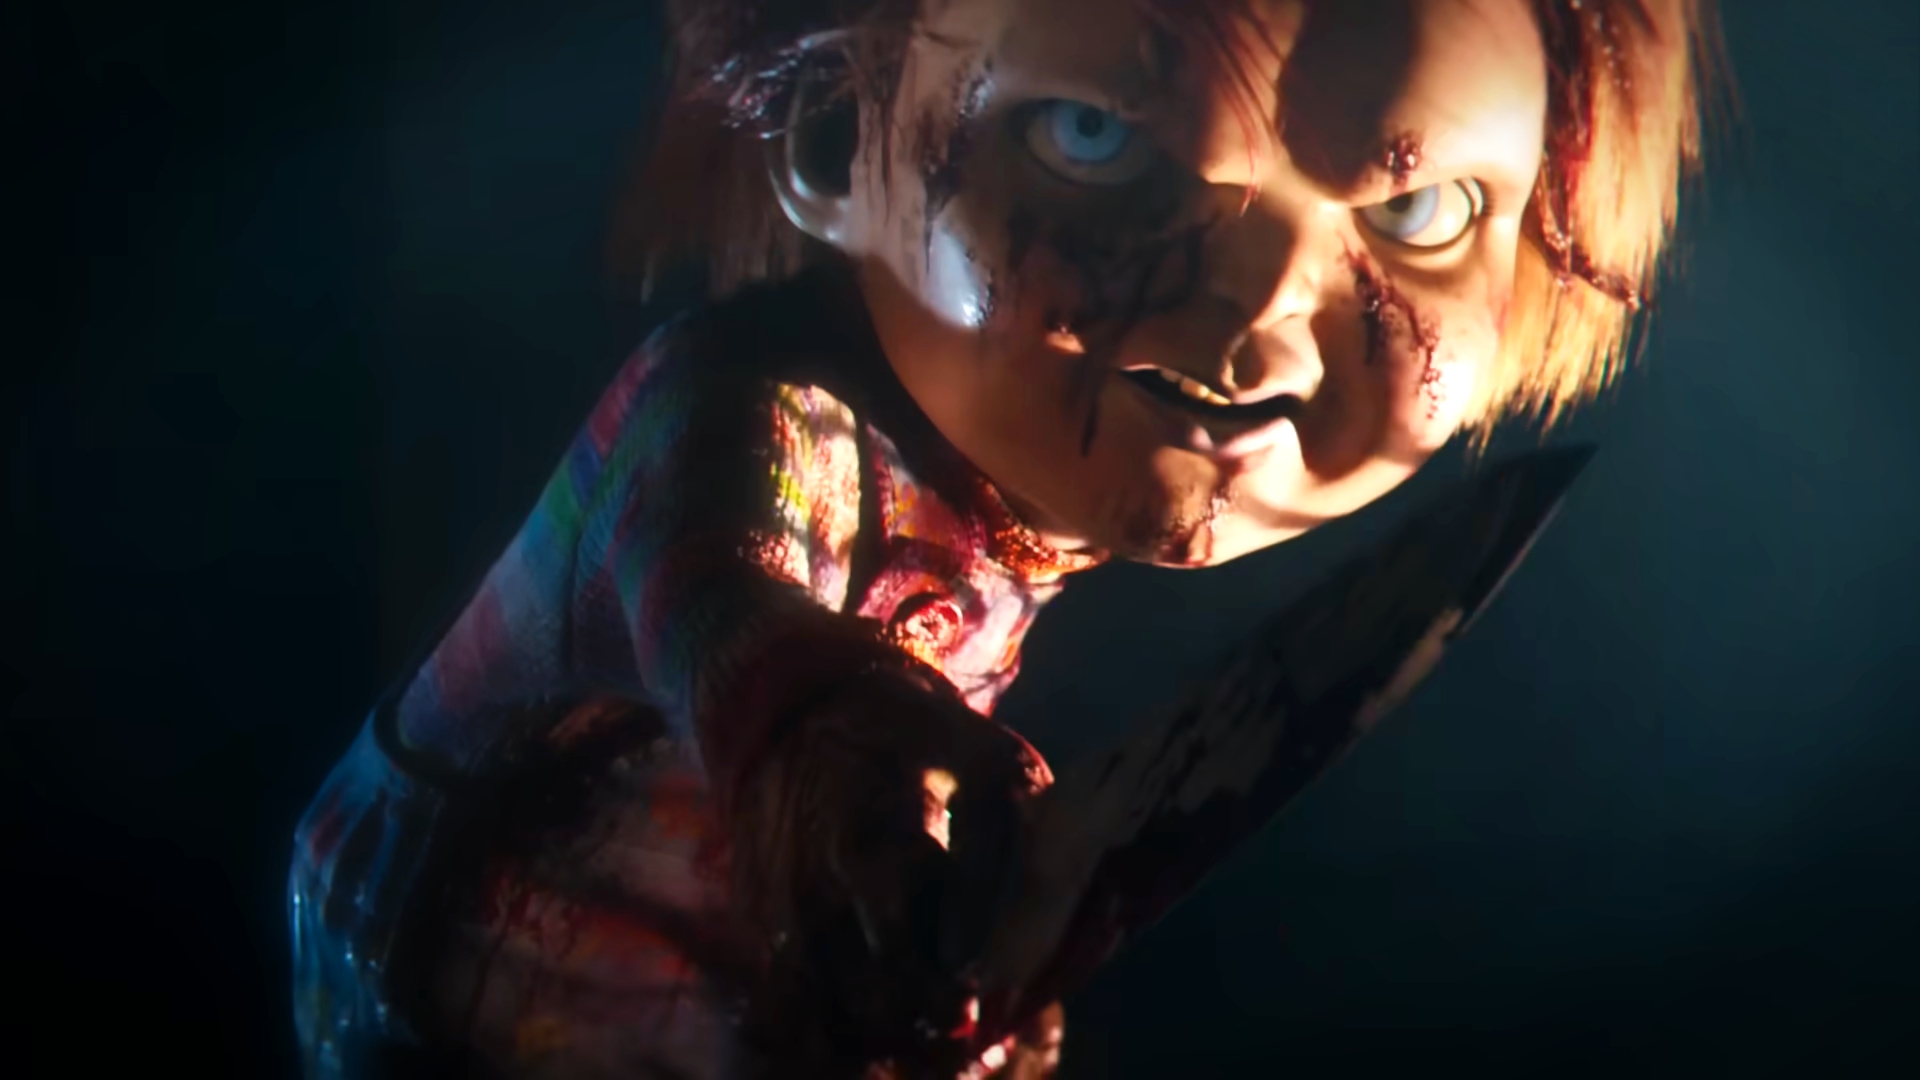 Dead by Daylight's most OP killer gets nerfed ahead of update